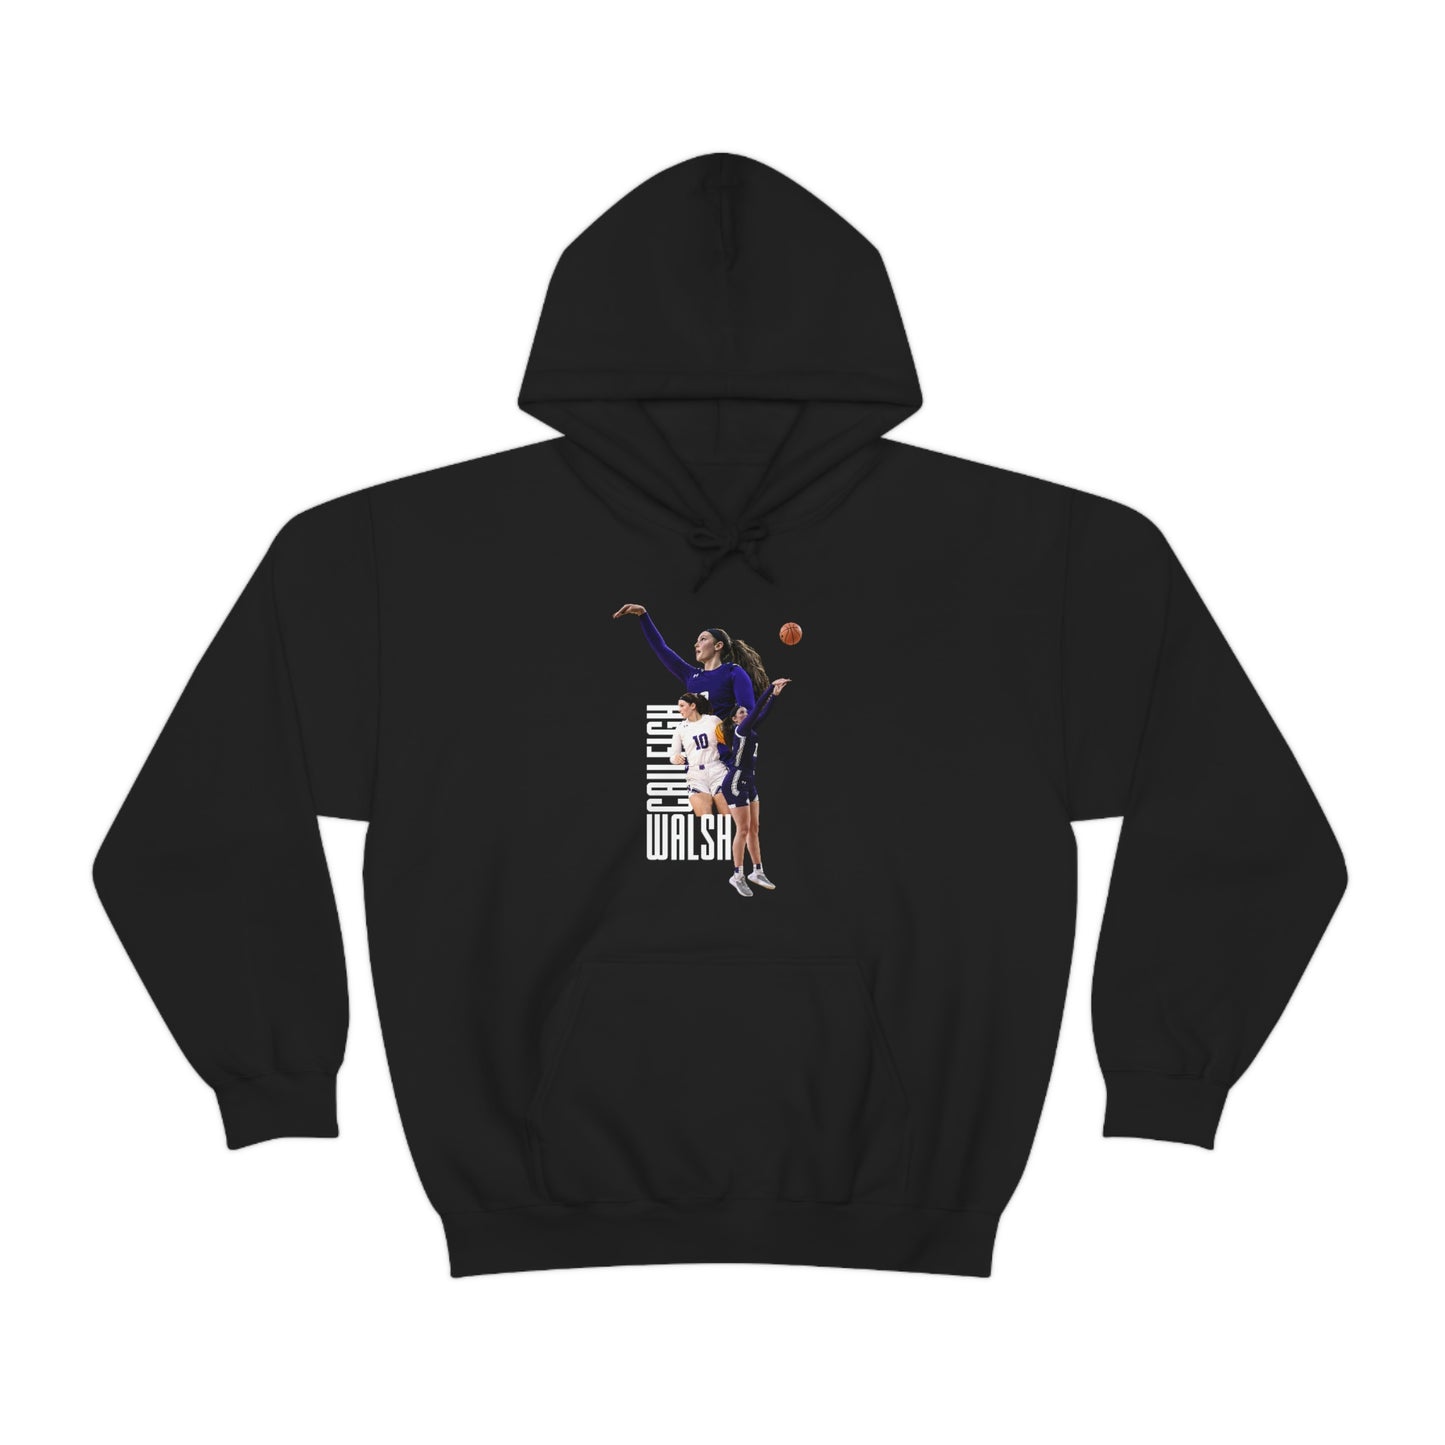 Caileigh Walsh: GameDay Hoodie